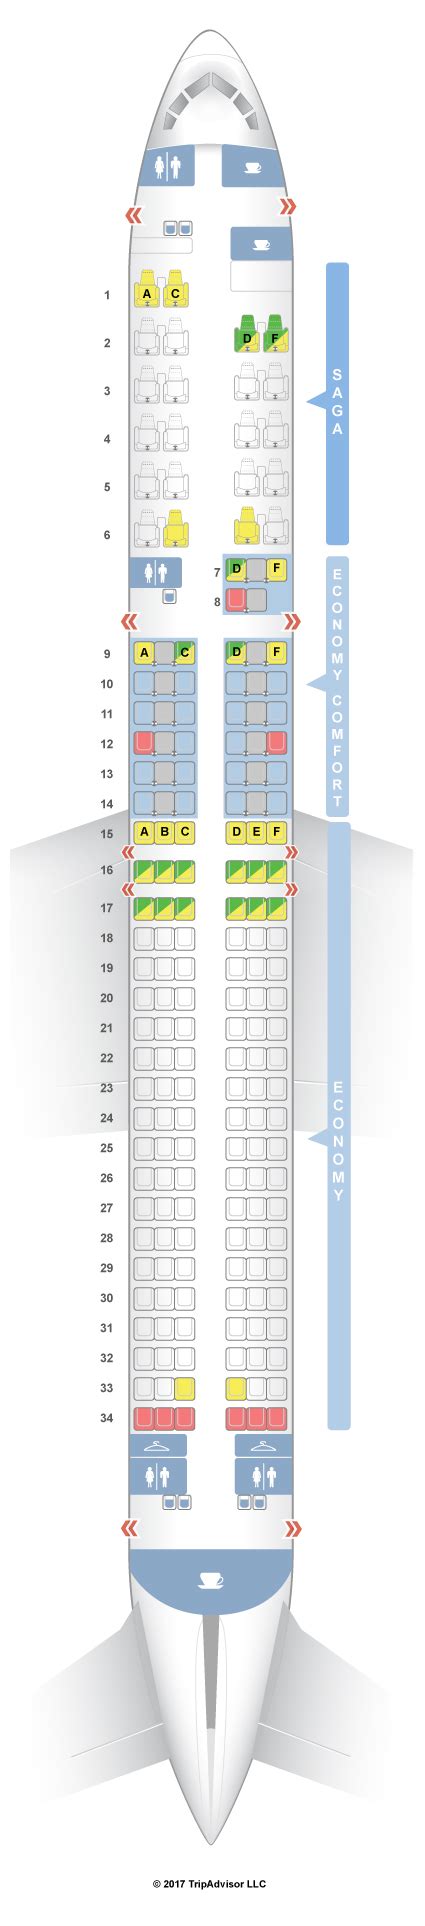 Icelandair’s 757-300s have seating for 225